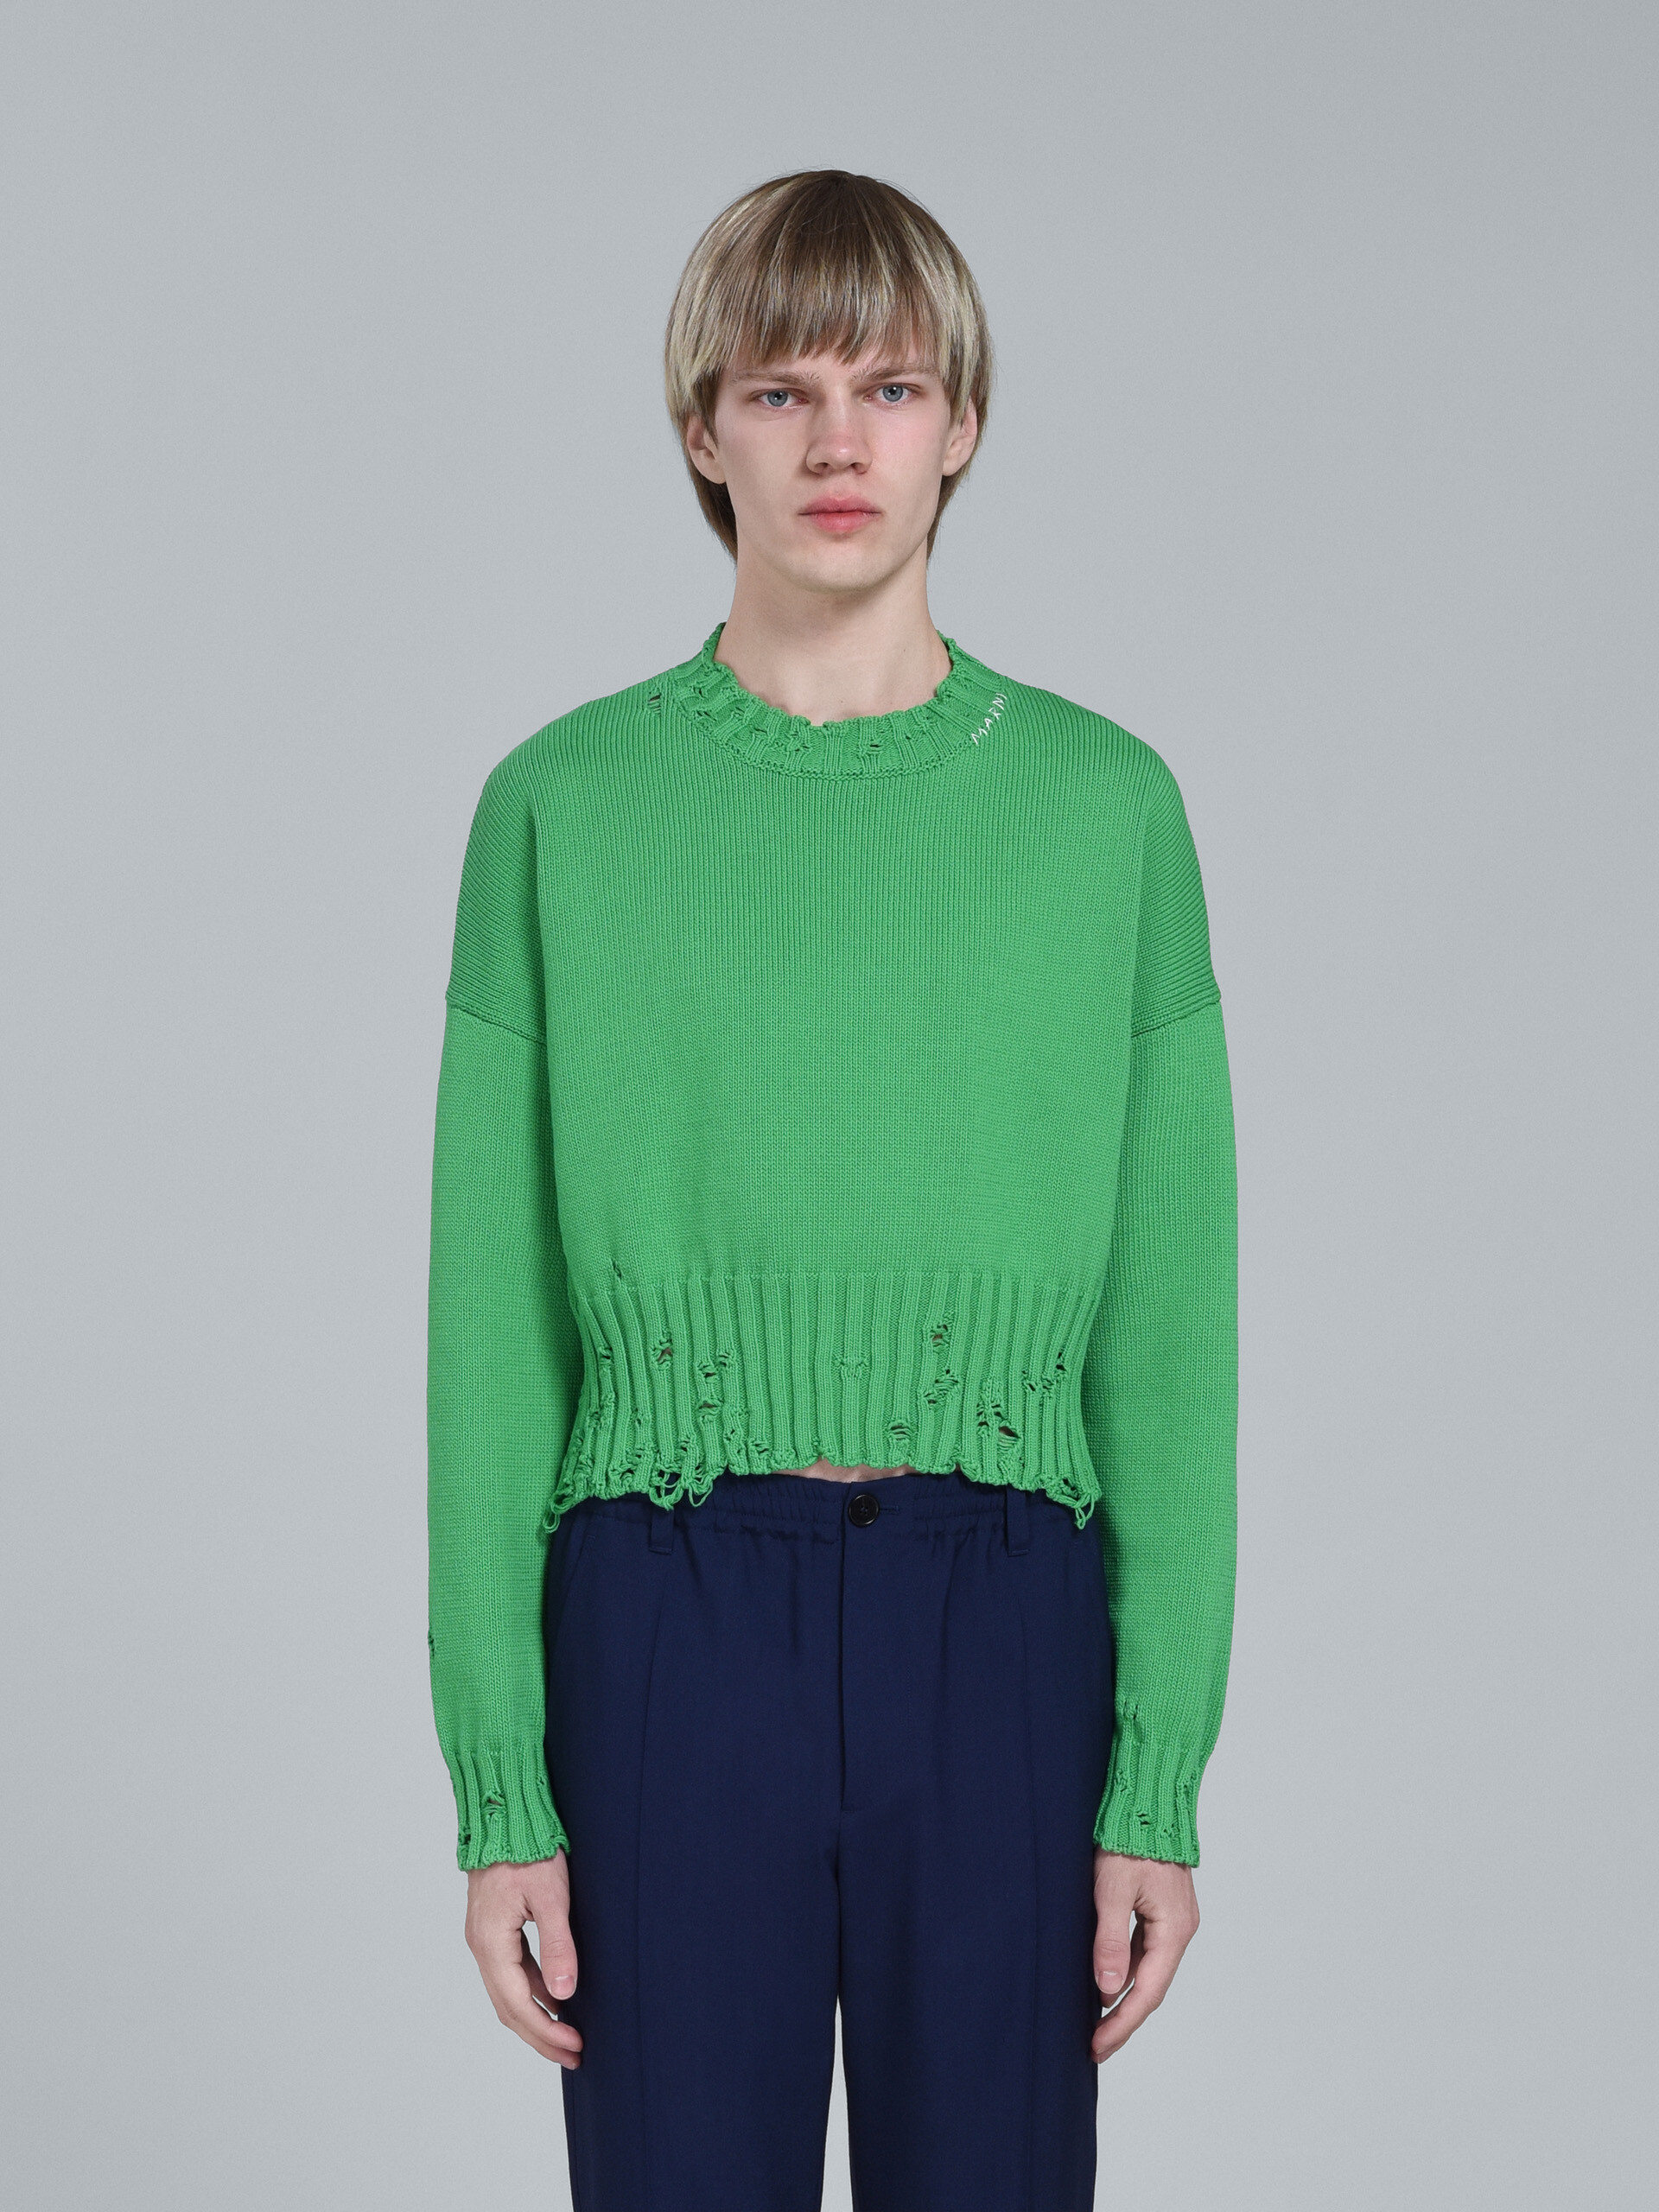 Green cotton crewneck sweater - Pullovers - Image 2